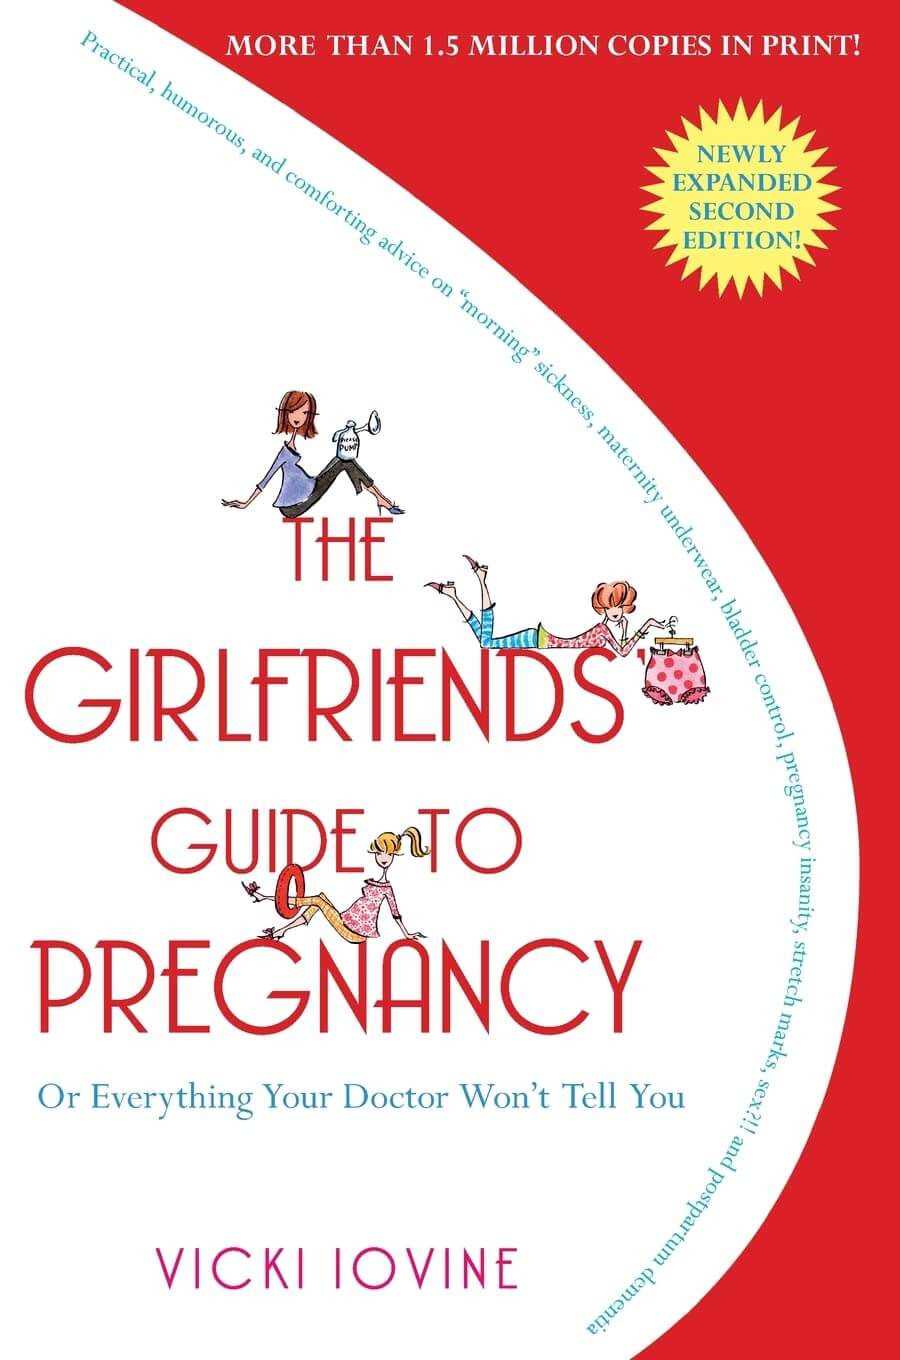 “The Girlfriends’ Guide to Pregnancy” by Vicki Iovine